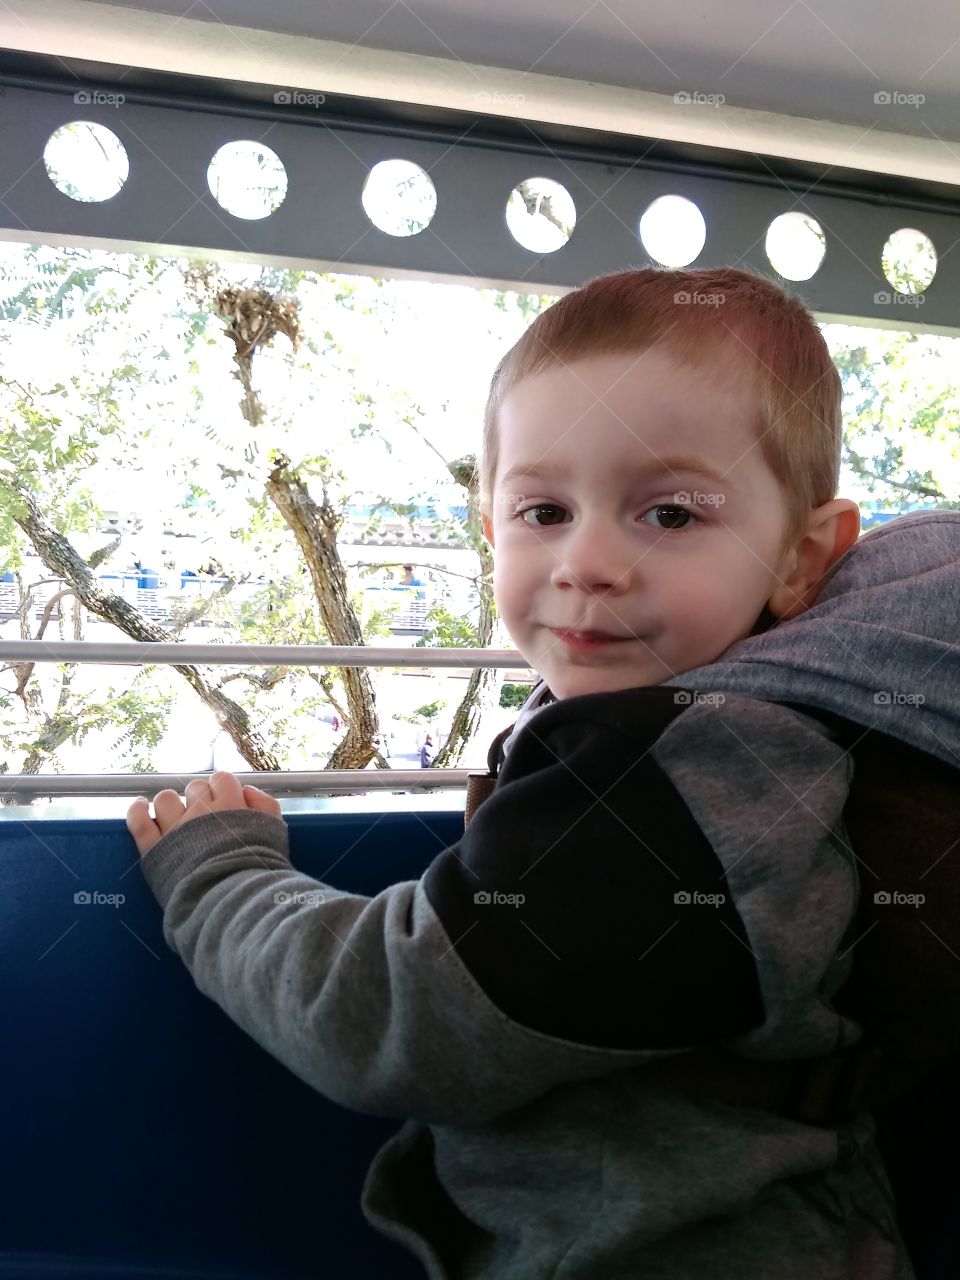 My Grandson loves the People Mover at Disney World.